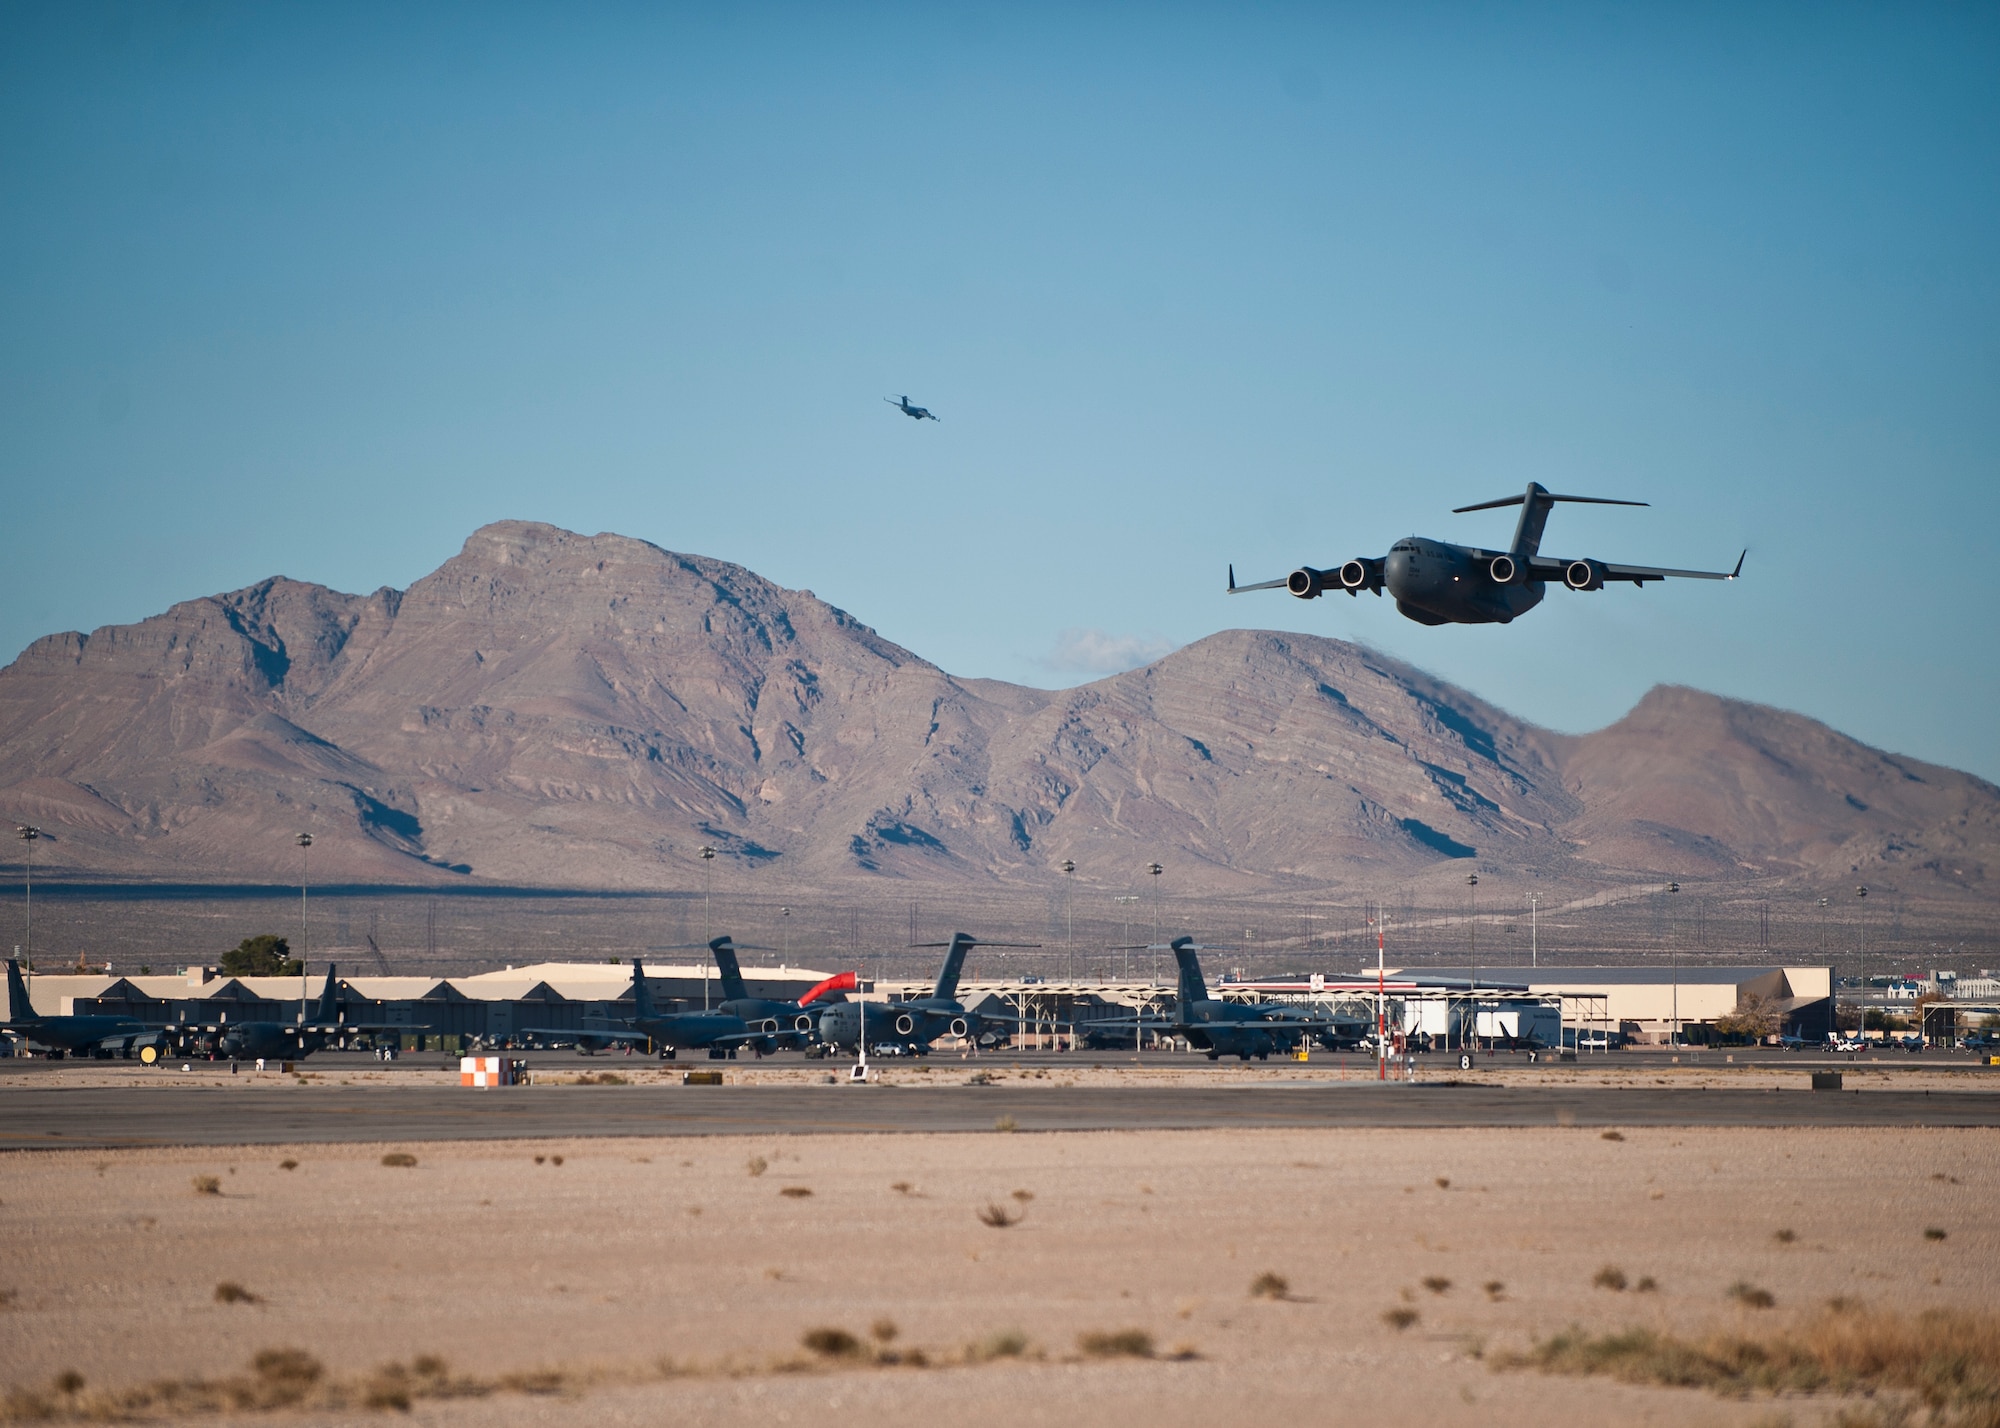 A C-17 Globemaster III launches during the U.S. Air Force Weapons School's Joint Forcible Entry Exercise 14B at Nellis Air Force Base, Nev., Dec. 6, 2014. The USAFWS's biannual JFE  exercises, which act as the capstone event for weapons school students, are large-scale air mobility exercises during which participants plan, seize and hold lodgments against armed opposition. (U.S. Air Force photo by Staff Sgt. Siuta B. Ika)